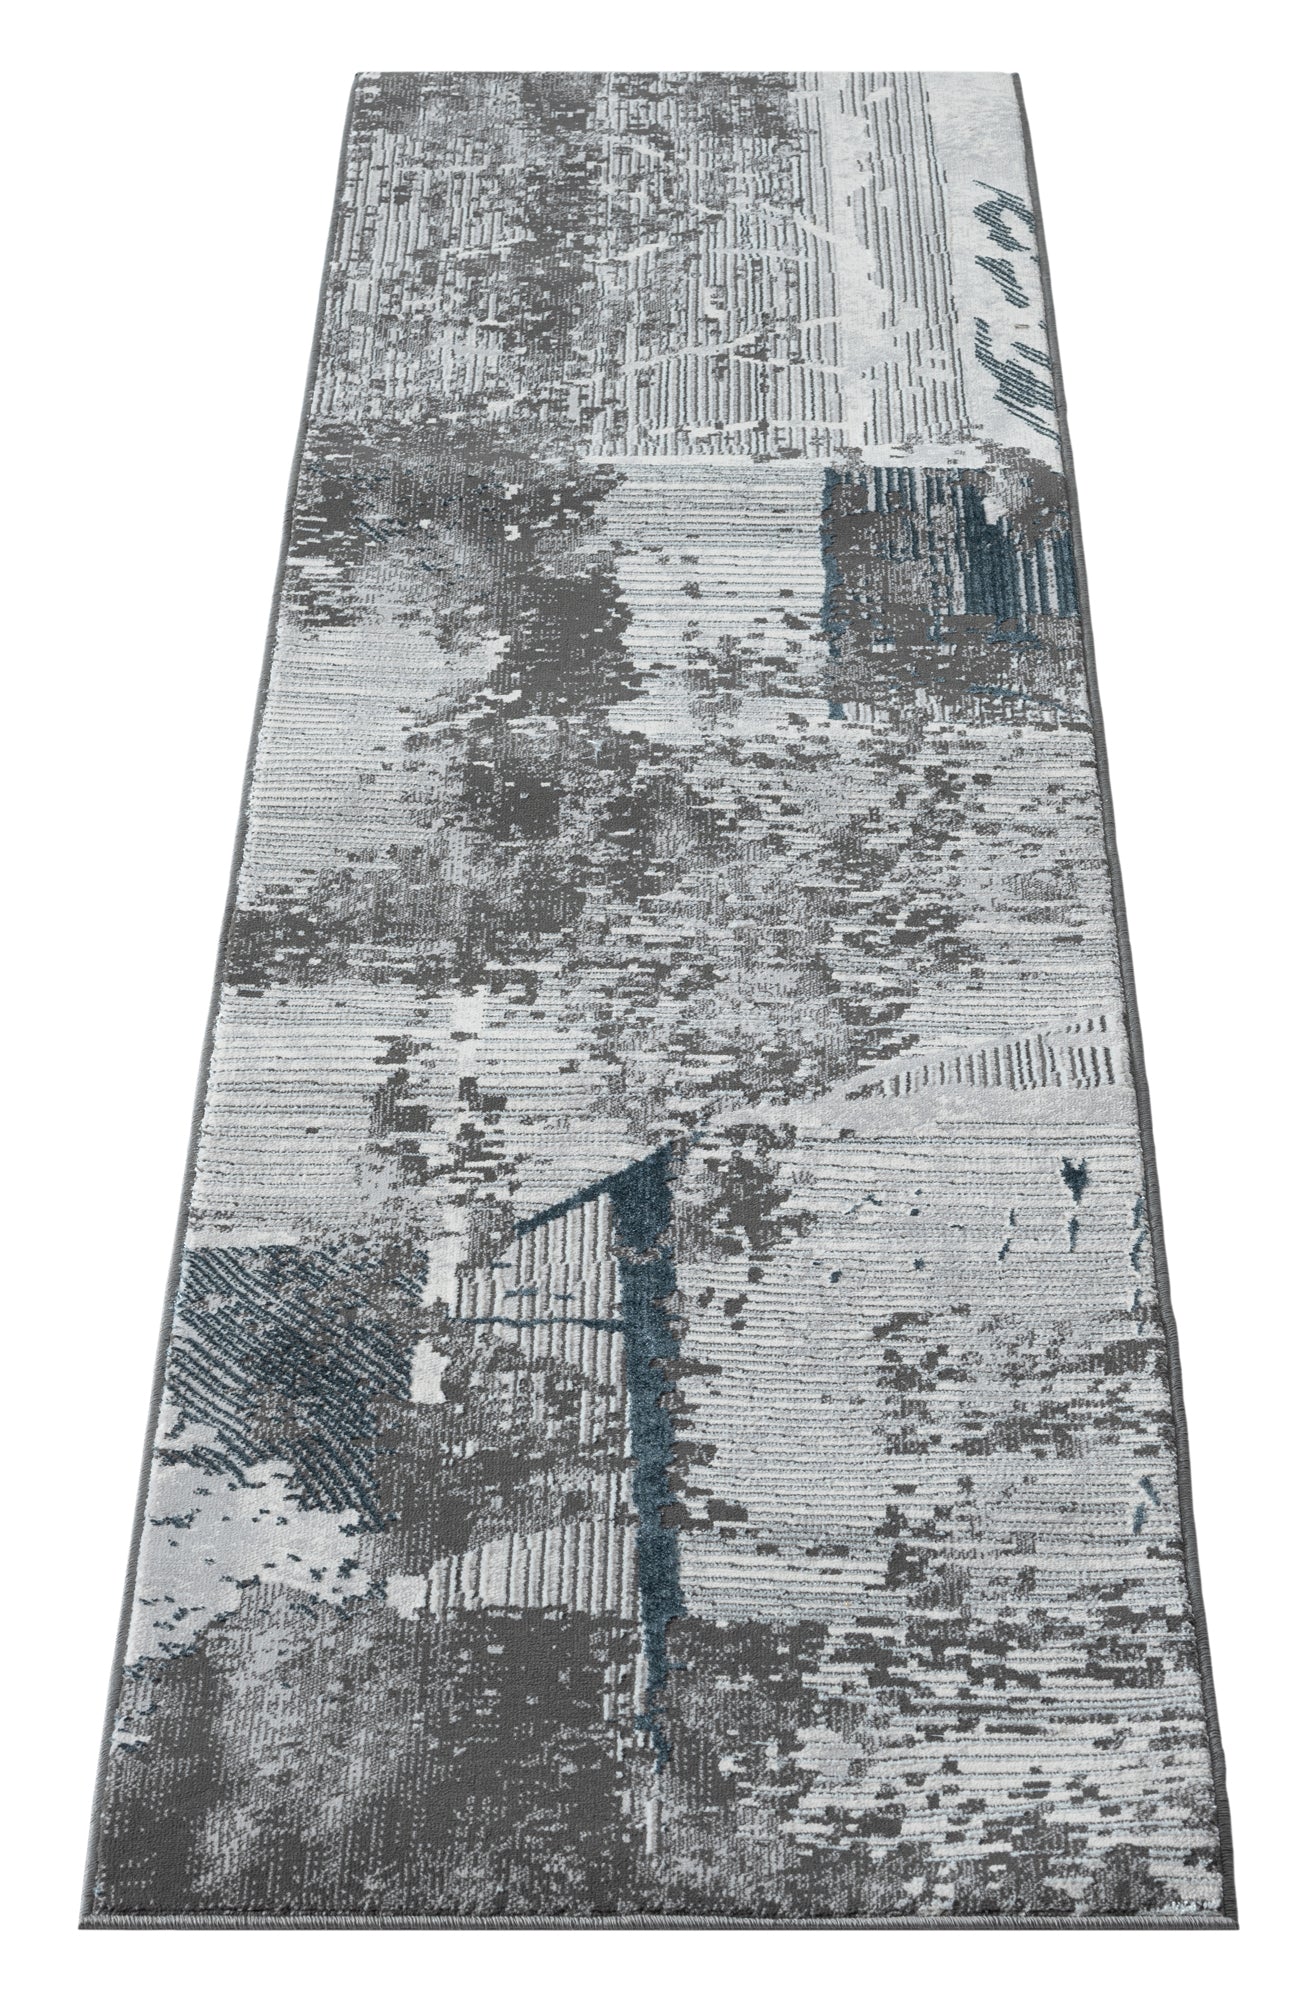 American cover design / Persian weavers Boutique 453 Steel Rug